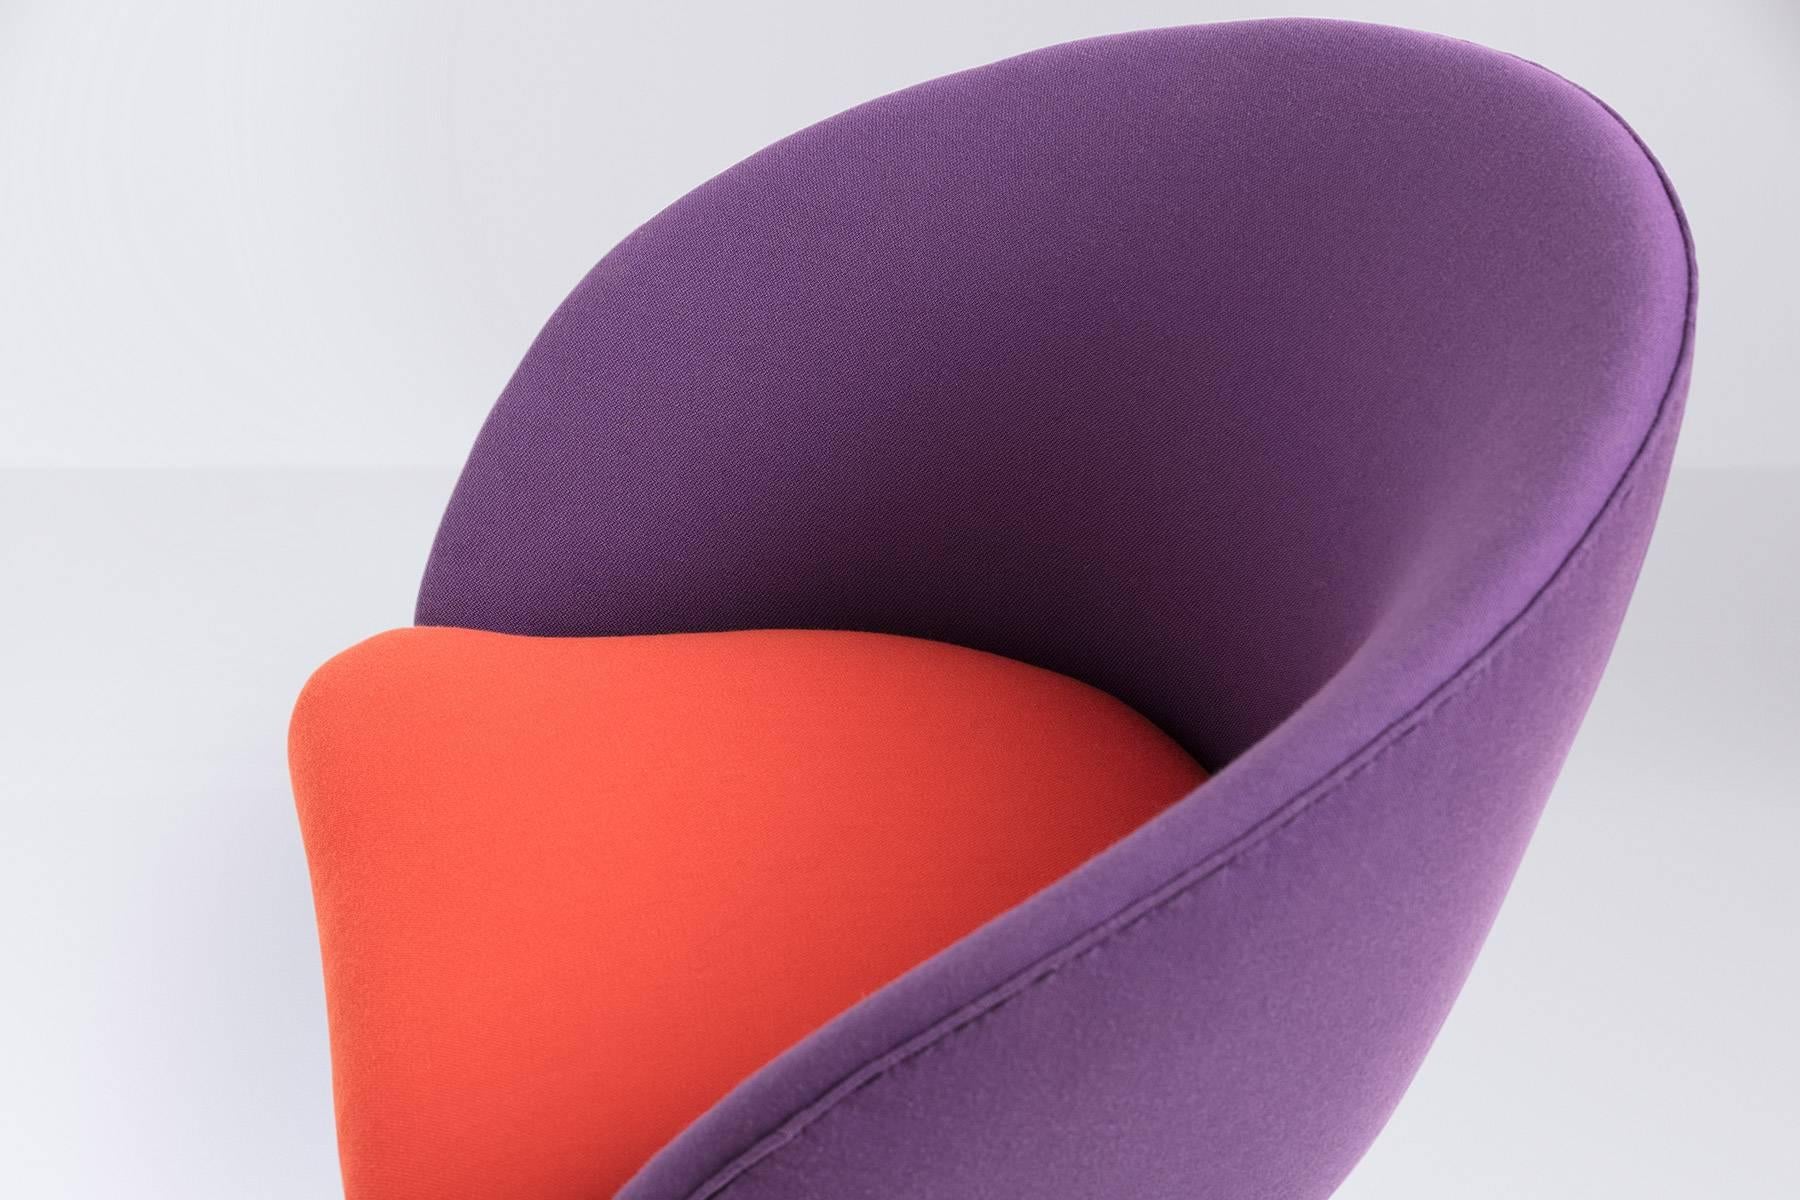 Danish Produced Cocktail Chair, 1950s, Orange and Purple Wool Upholstery In Excellent Condition For Sale In Copenhagen, DK